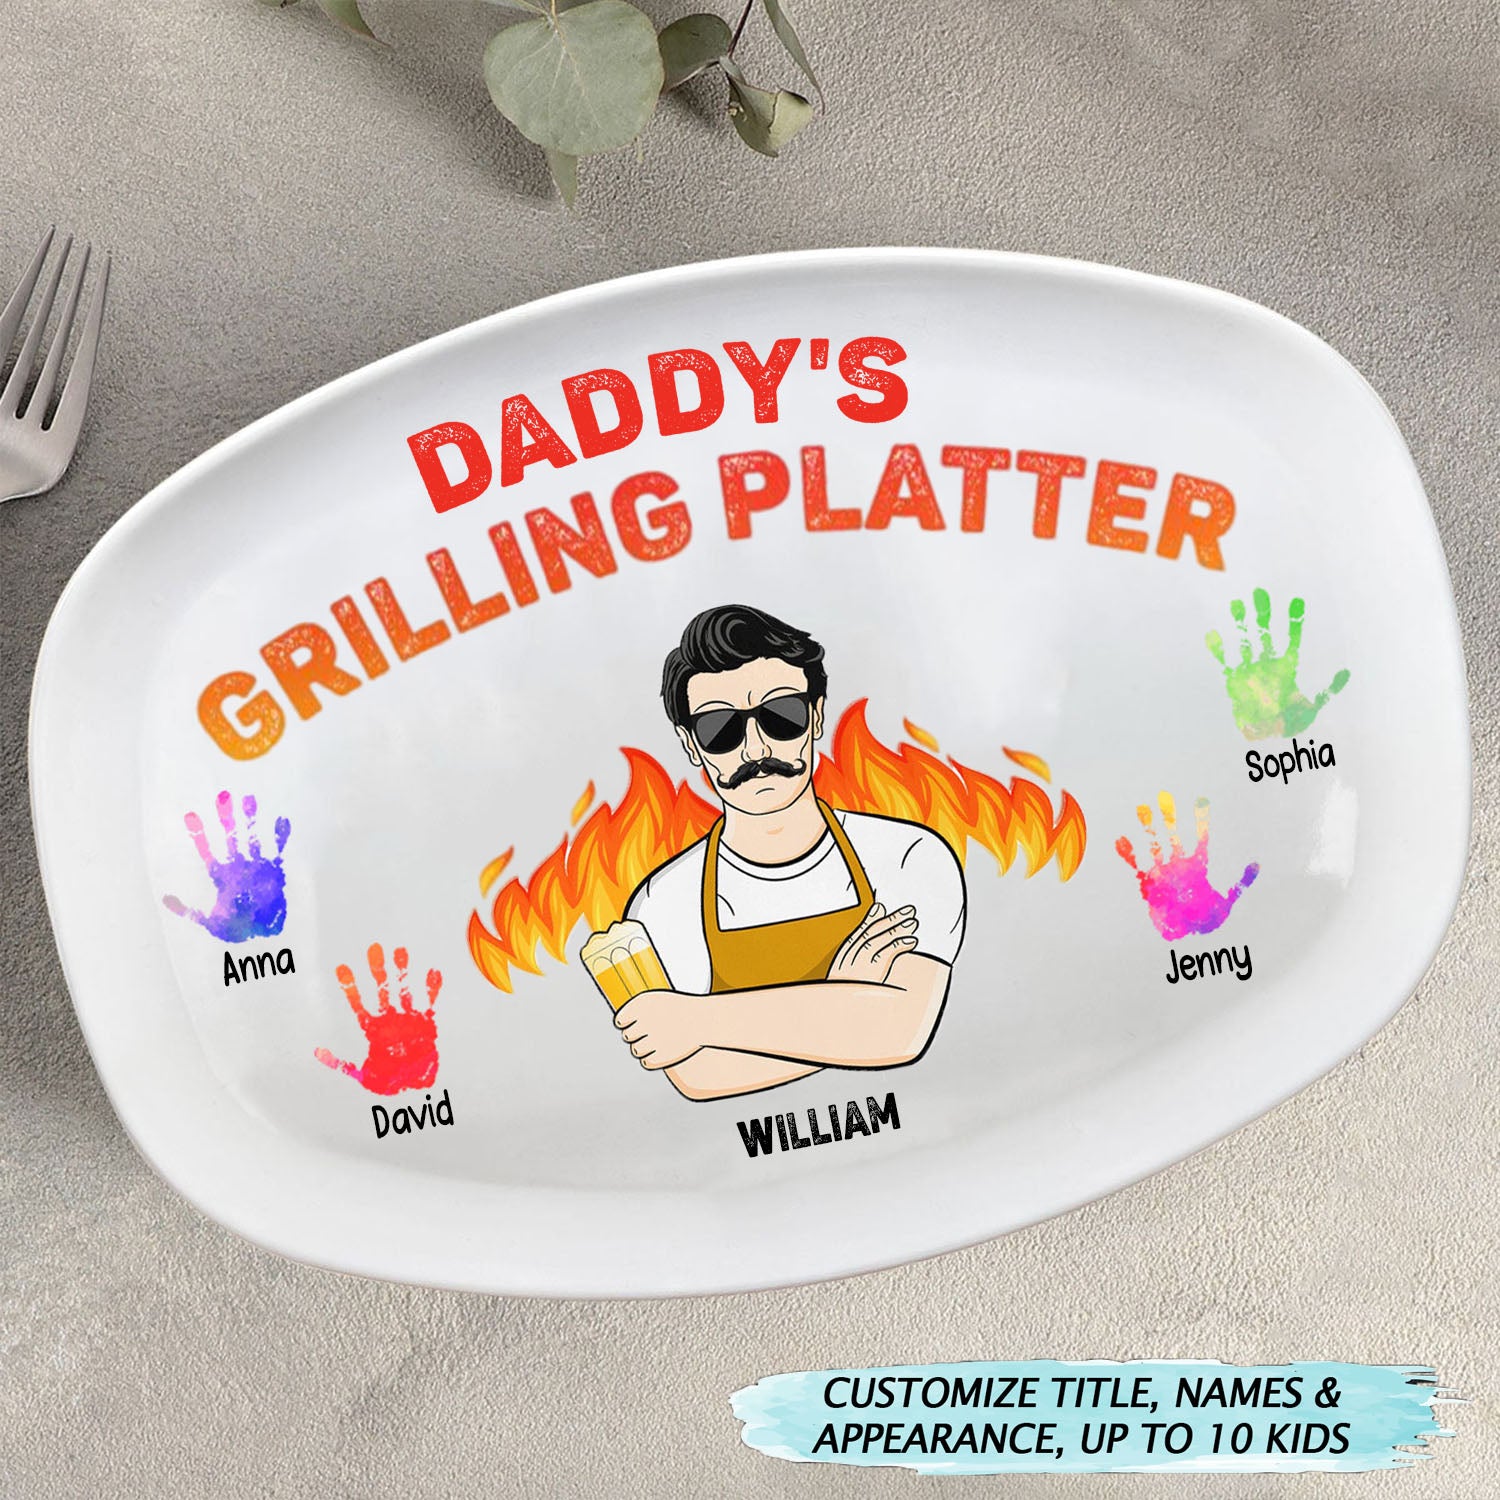 Daddy's Grilling Platter - Gift For Dad, Father, Grandfather, Grandpa - Personalized Plate